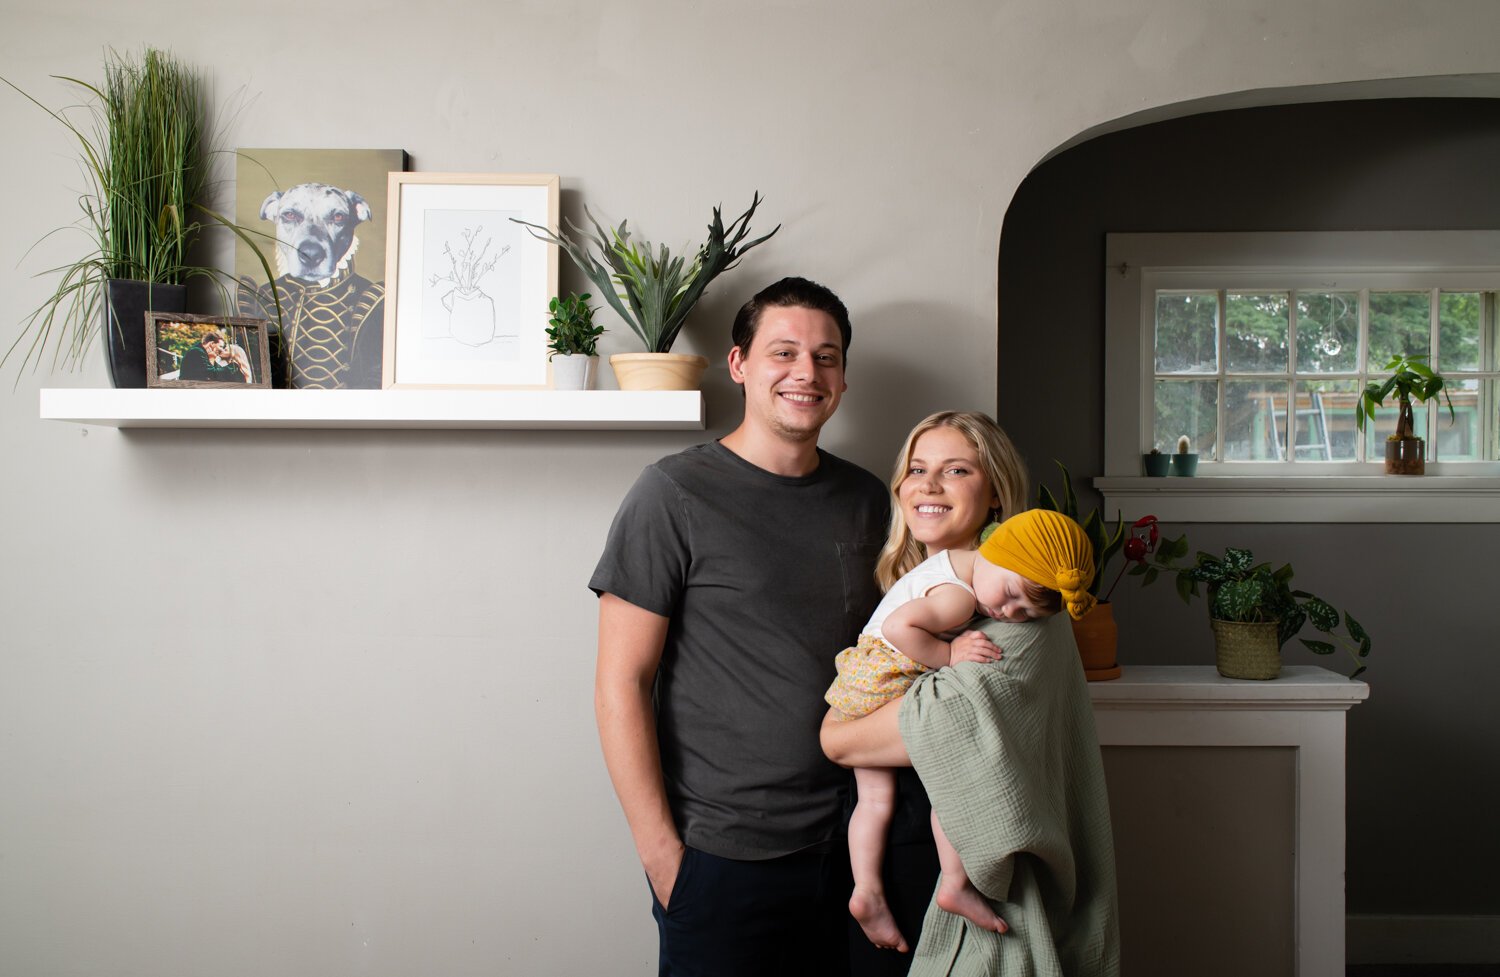 Katie Fyfe and her fiancé, Andy Gelwicks, with their 8-month-old daughter, Poppy, in their living room. 